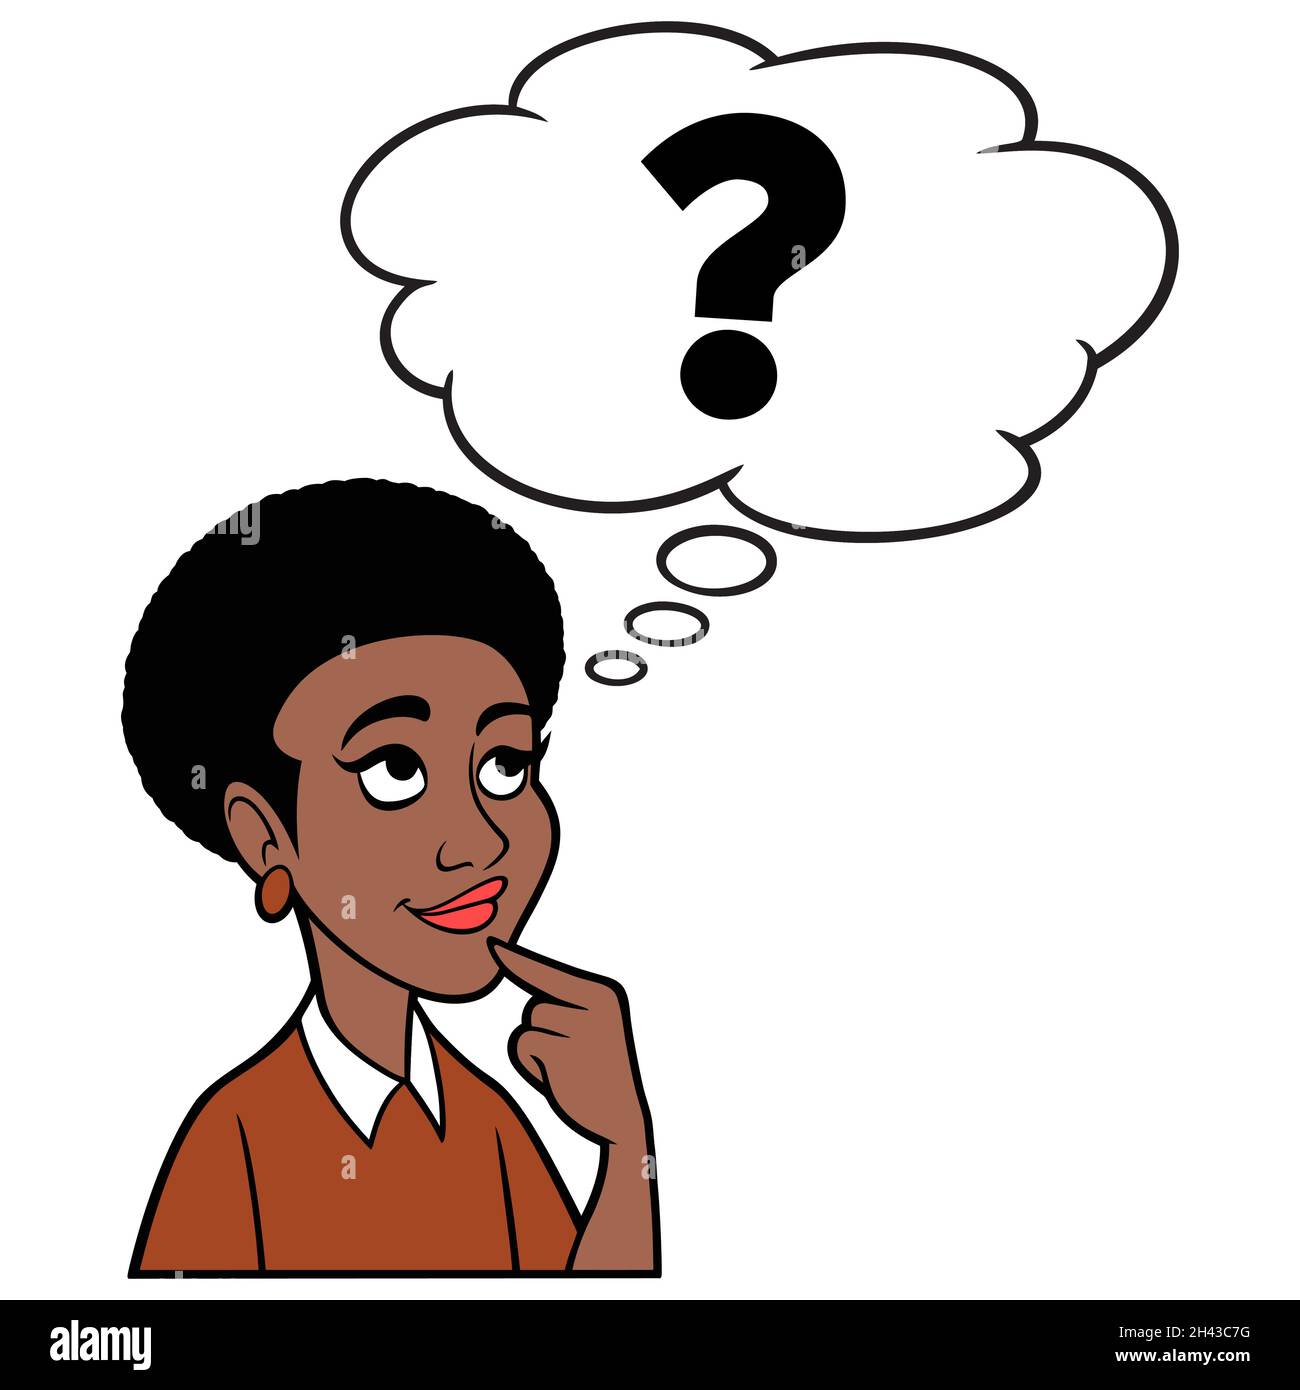 Woman thinking about Questions - A cartoon illustration of a Woman thinking about a few Questions. Stock Vector